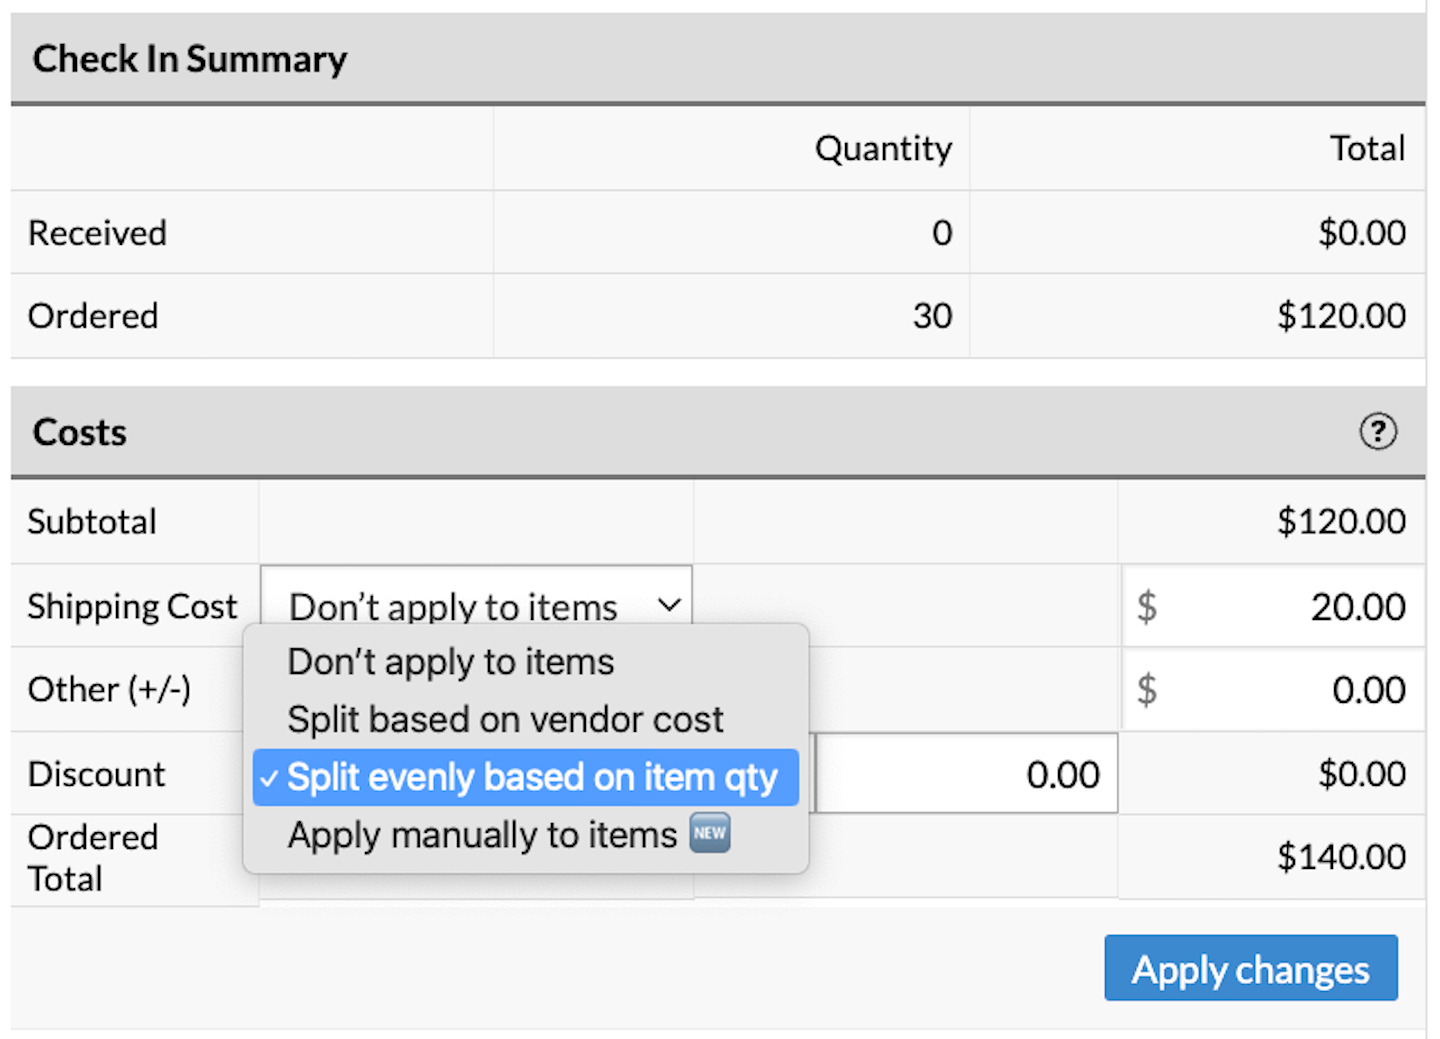 Discount drop-down list, showing options Don't apply to items, Split based on vendor cost, Split evenly based on item quantity, and Apply manually to items.